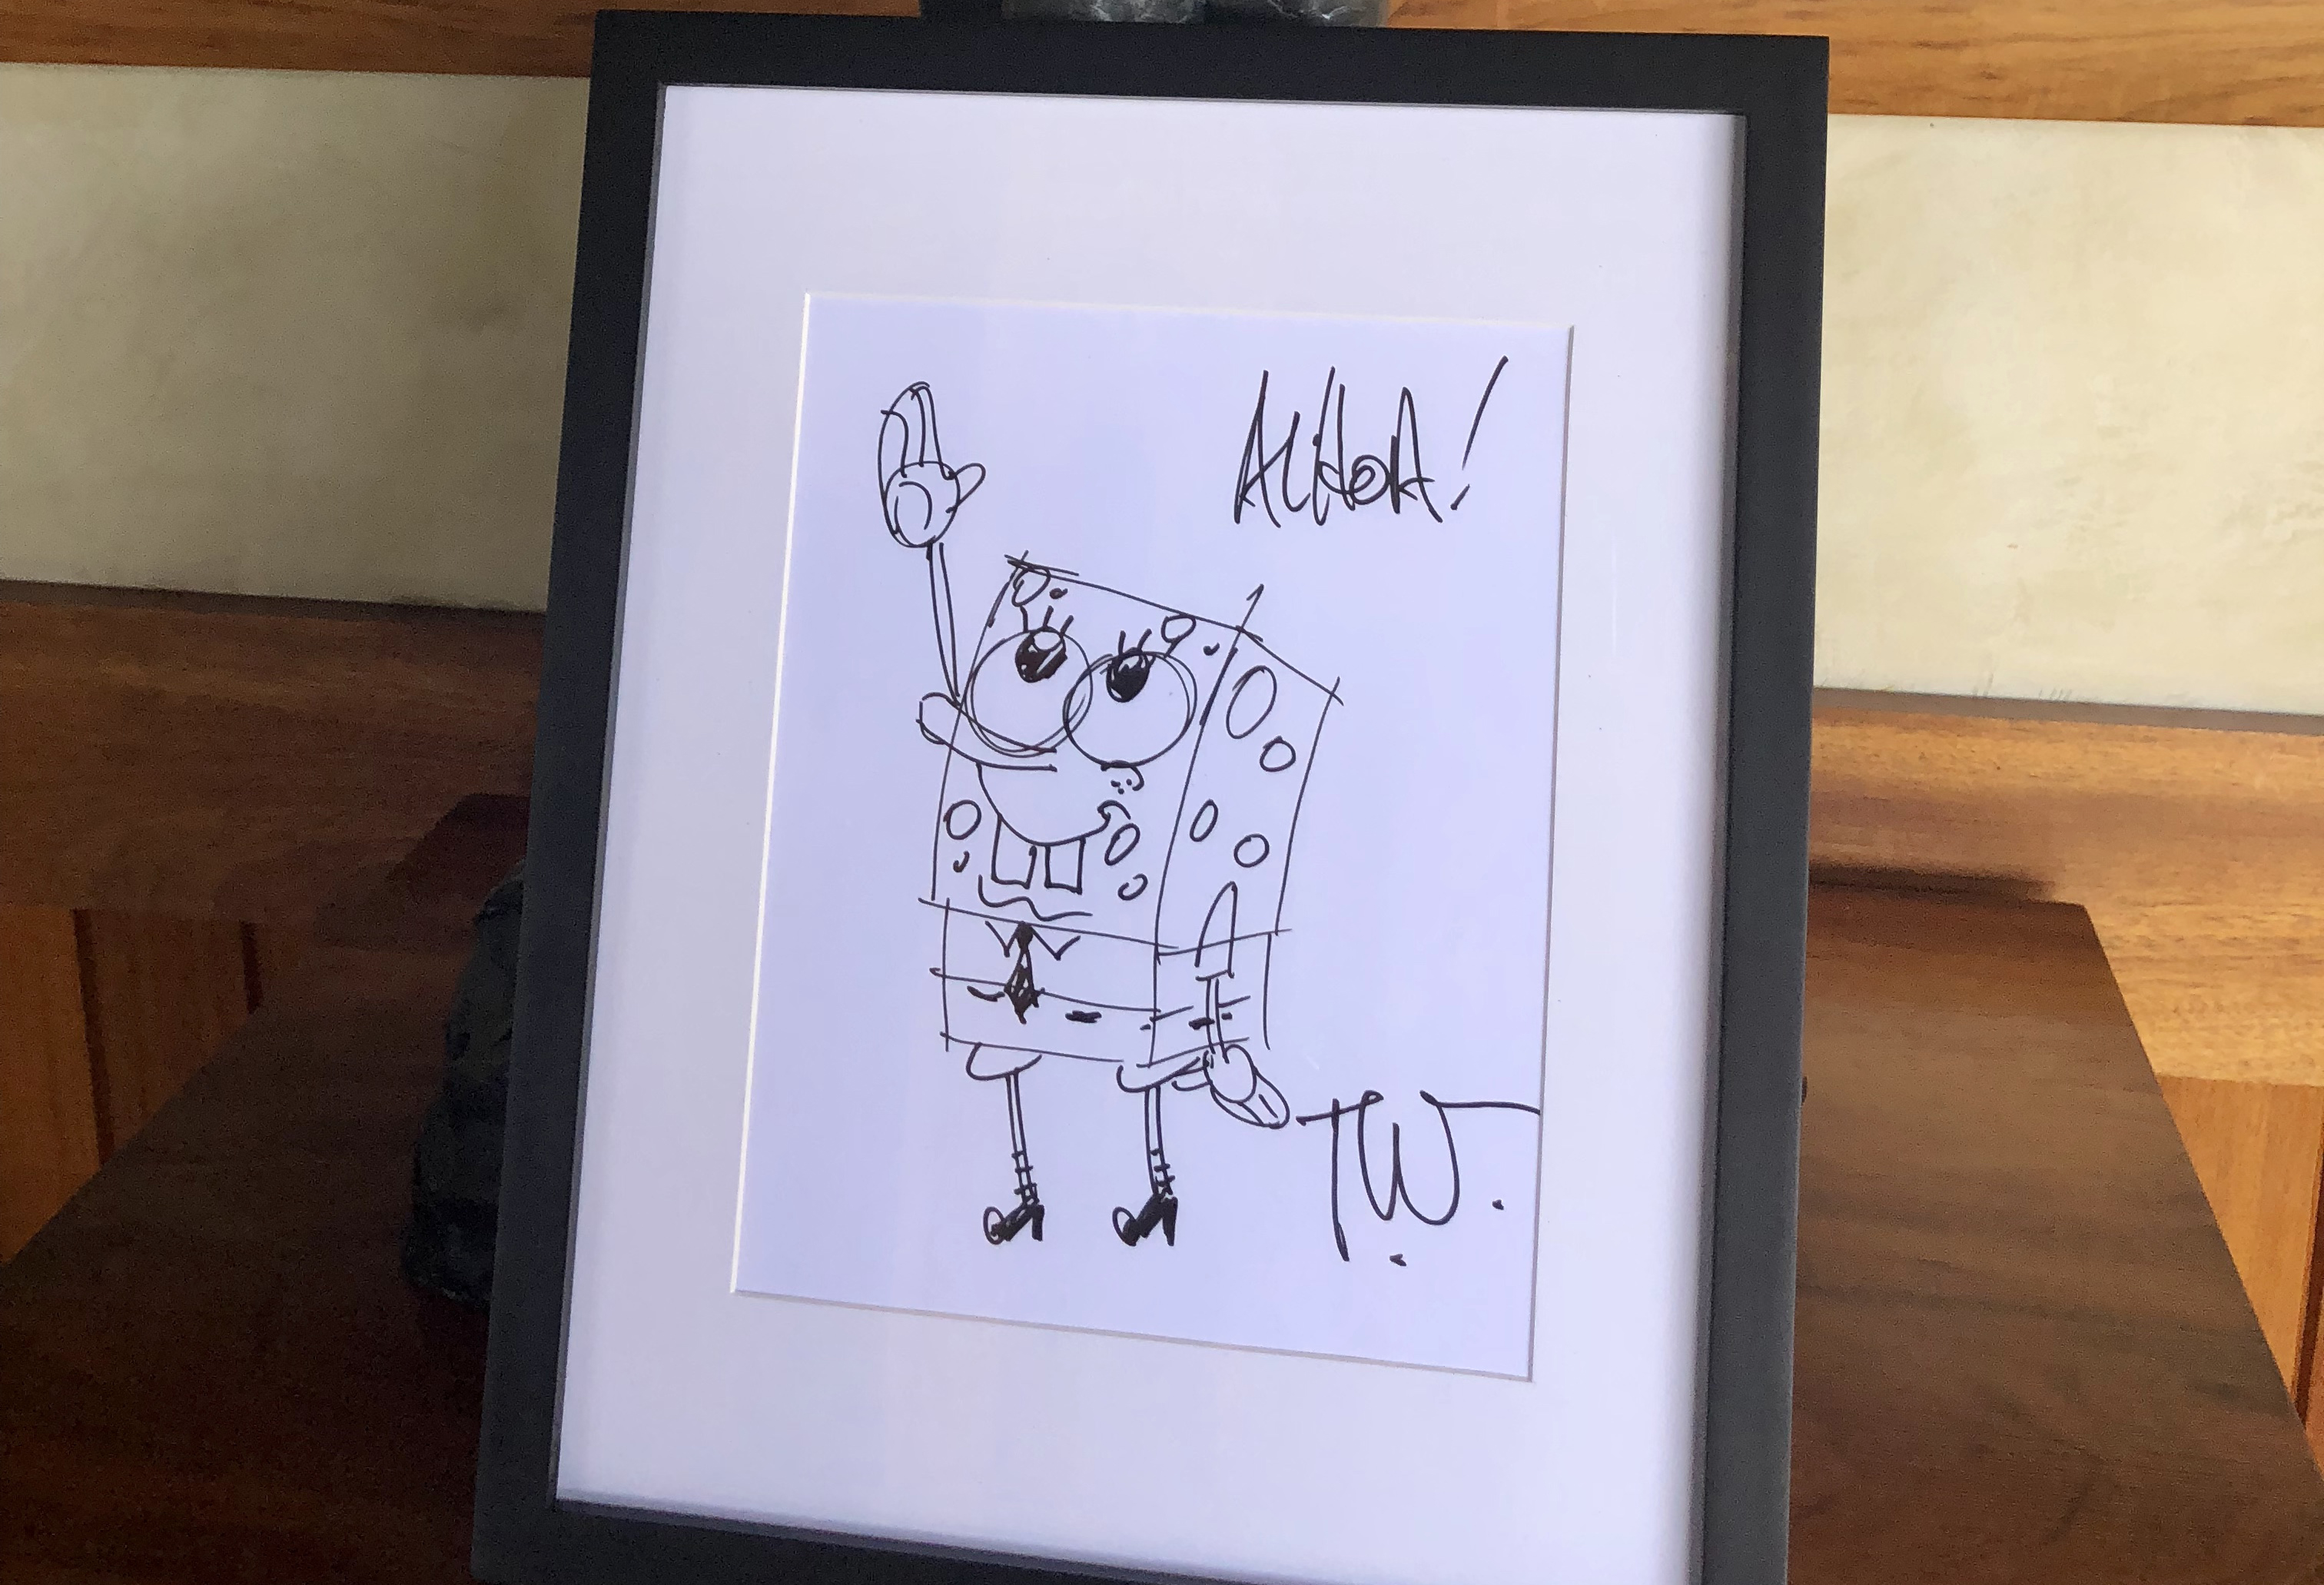 Character drawing of spongebob in a frame